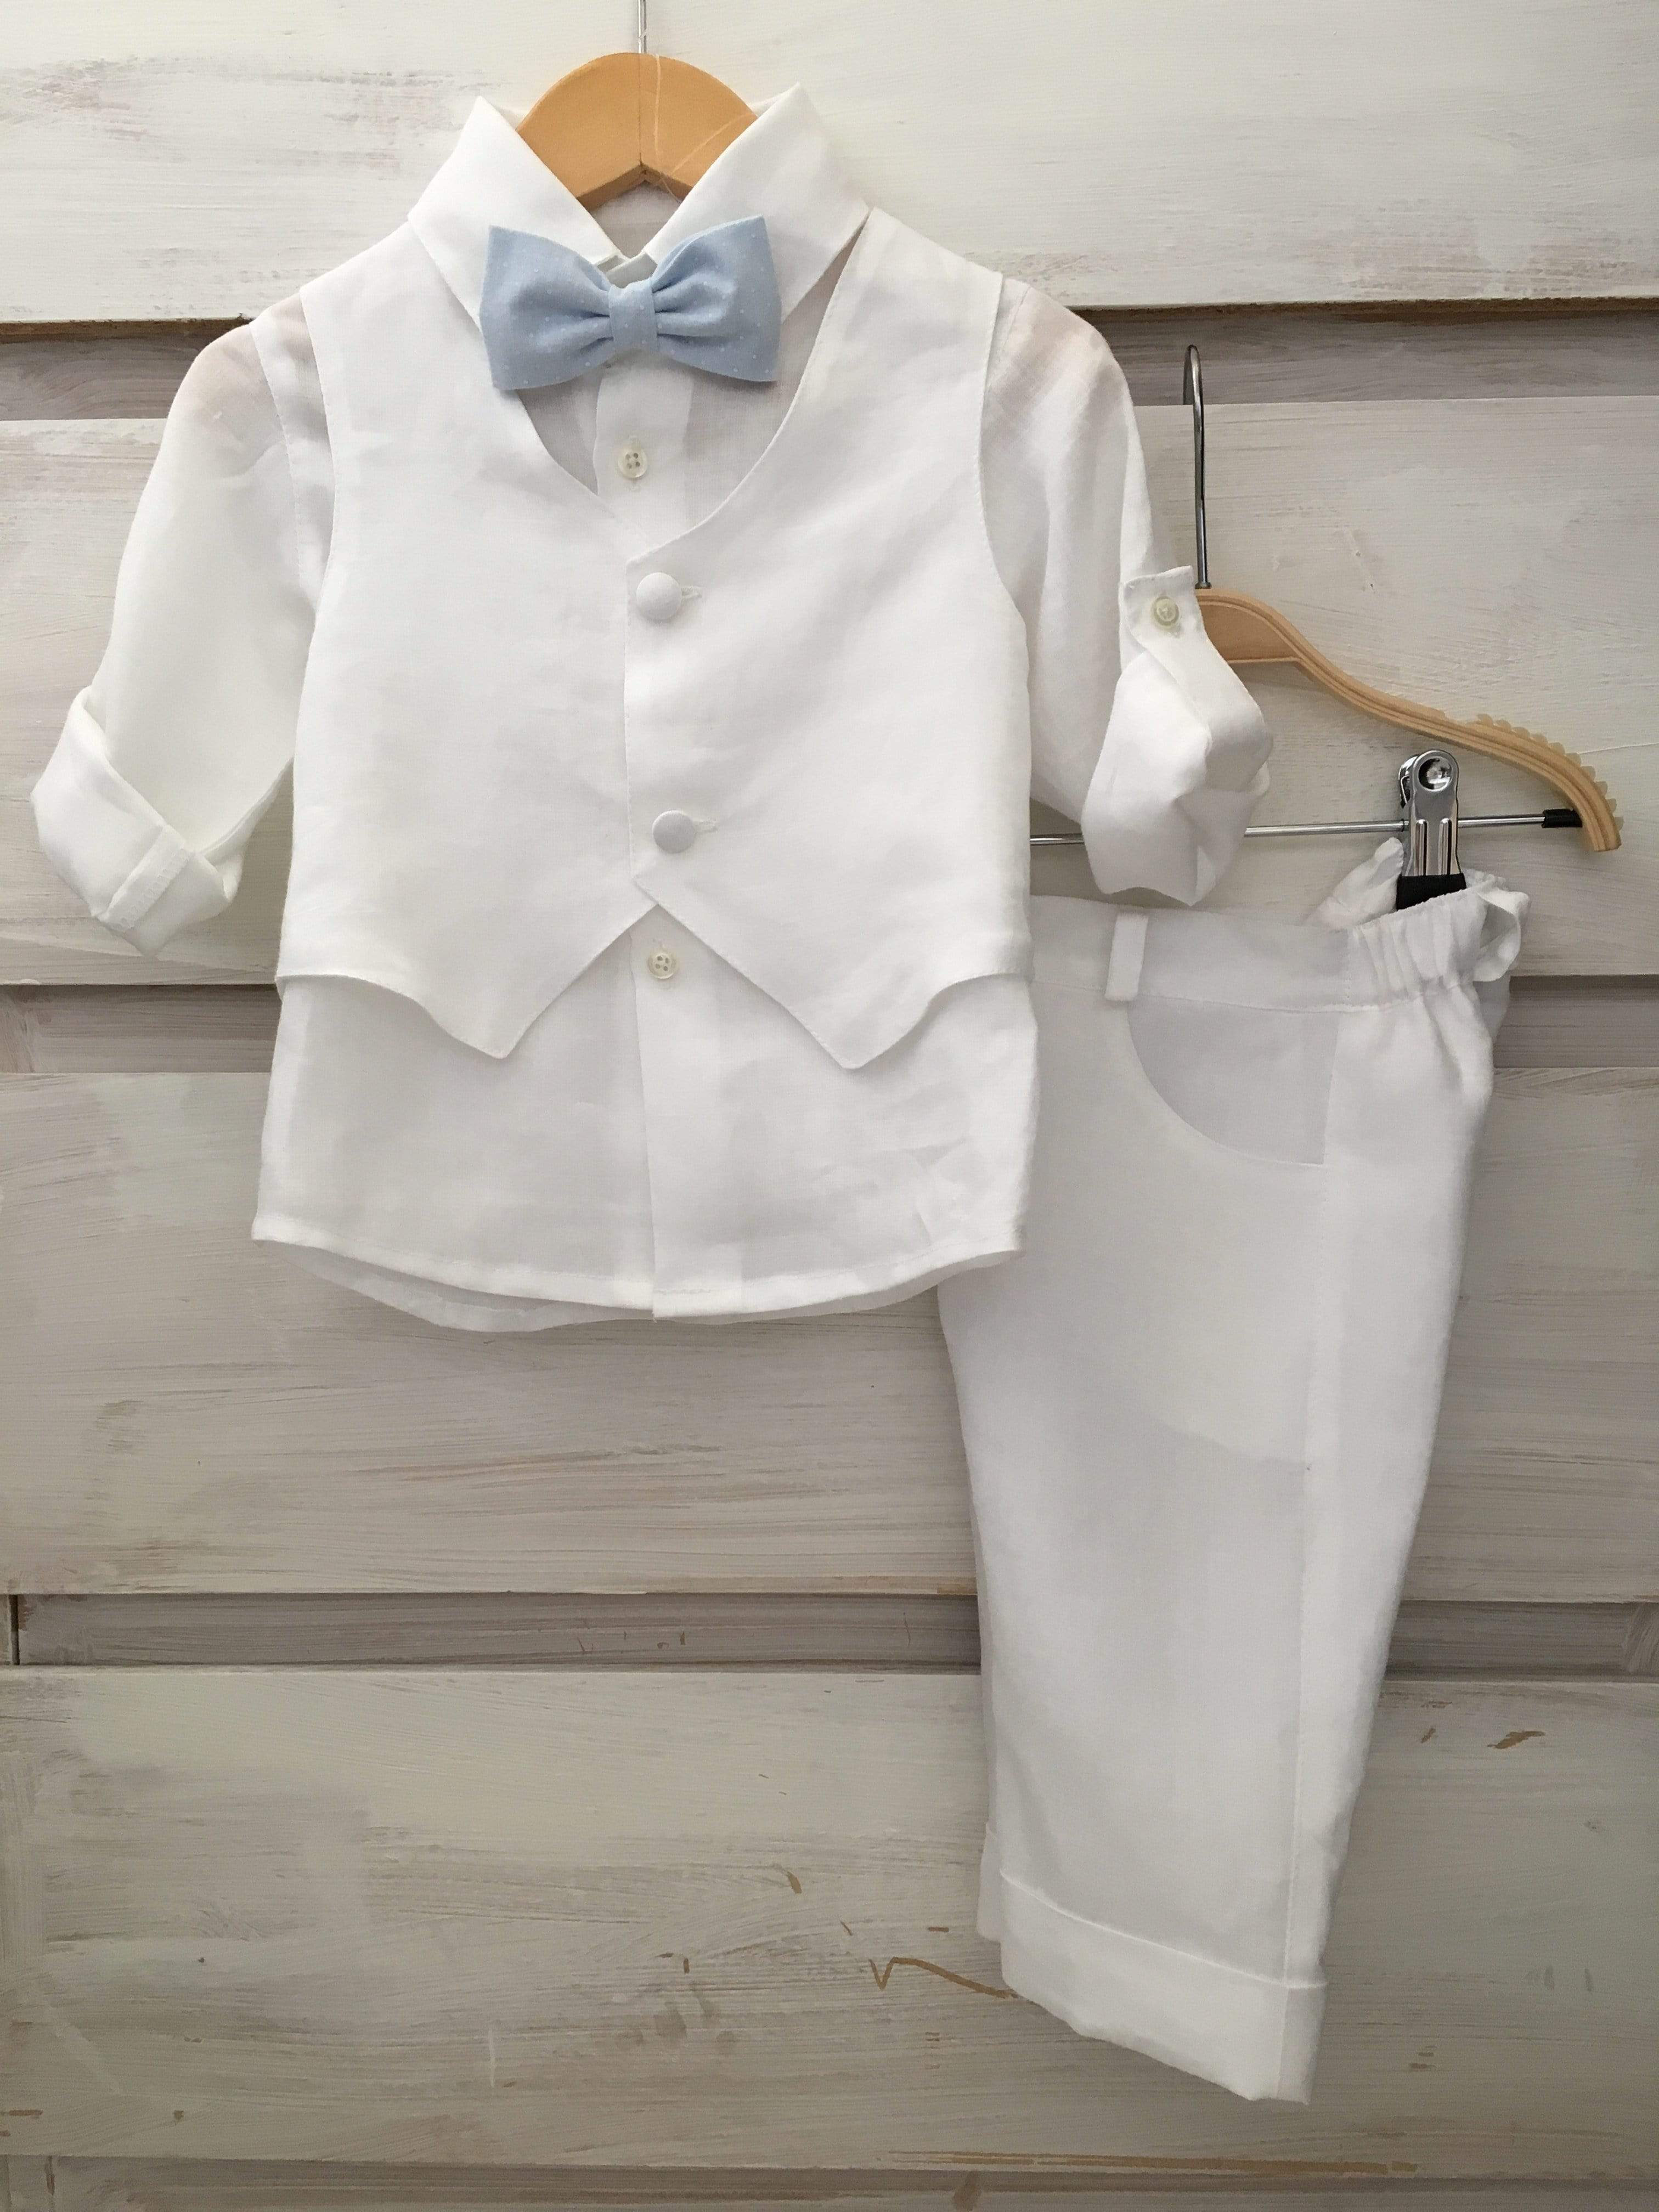 1967- All White Affair Baptism / Christening Outfit